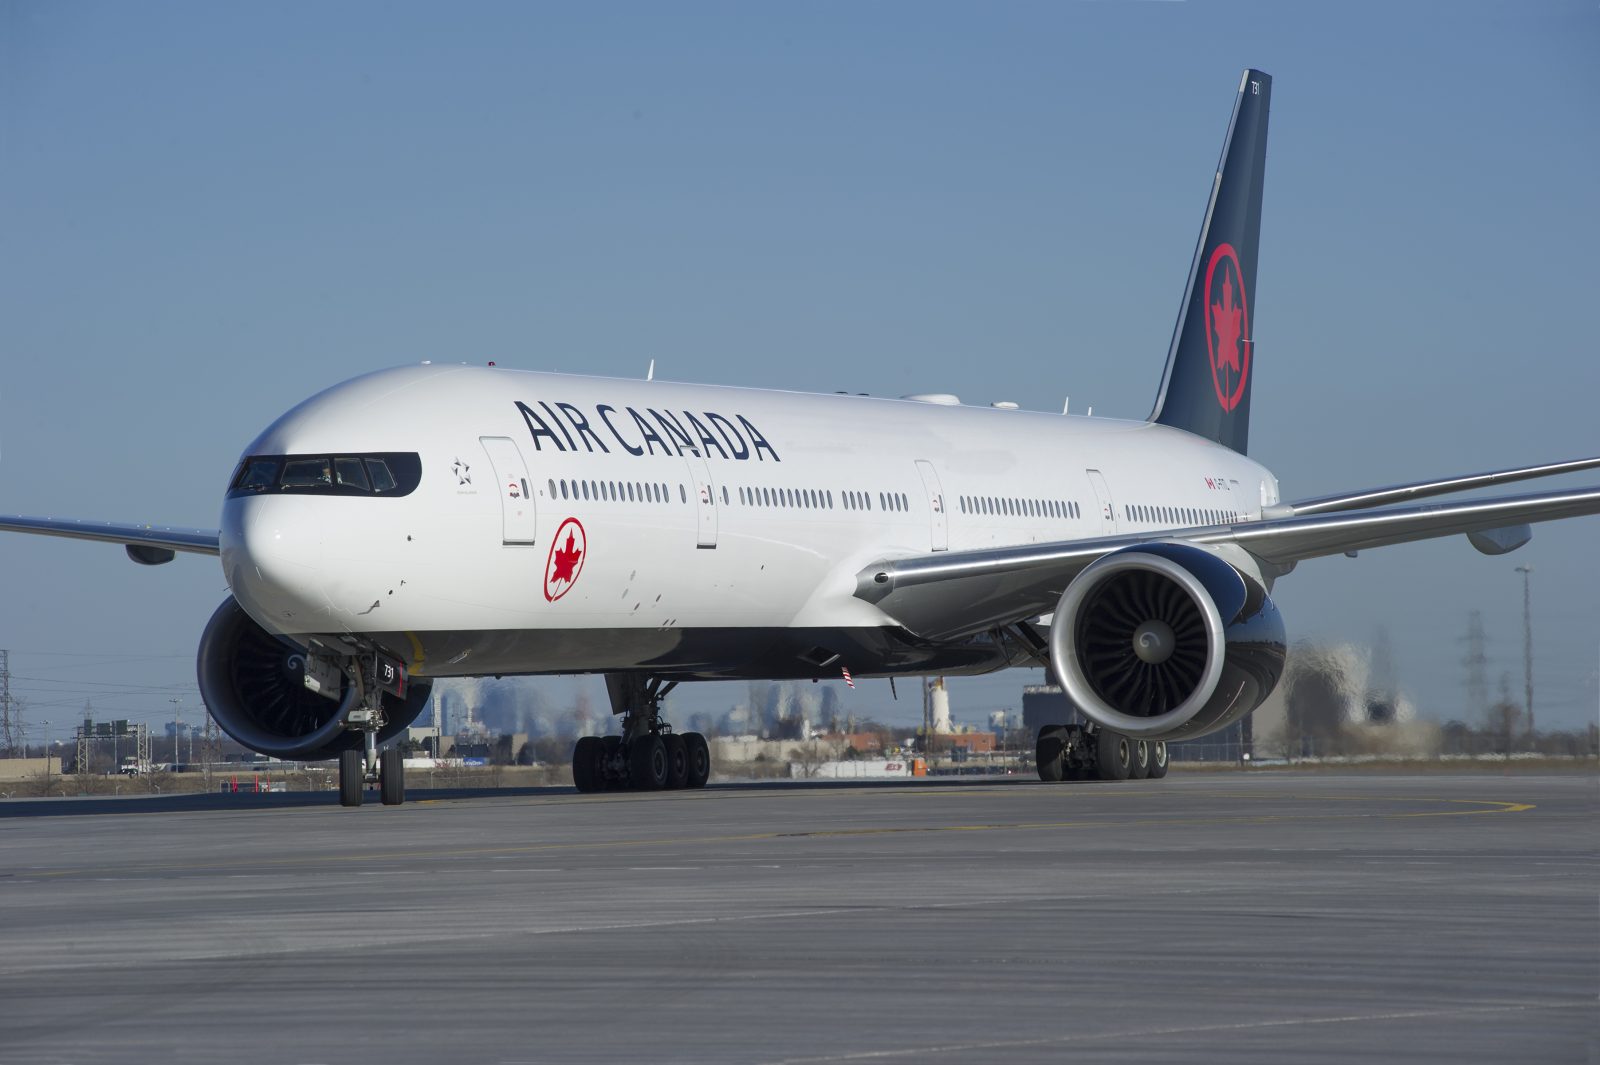 Air Canada Will No Longer Refer to Passengers as "Ladies and Gentlemen" in Onboard Announcements